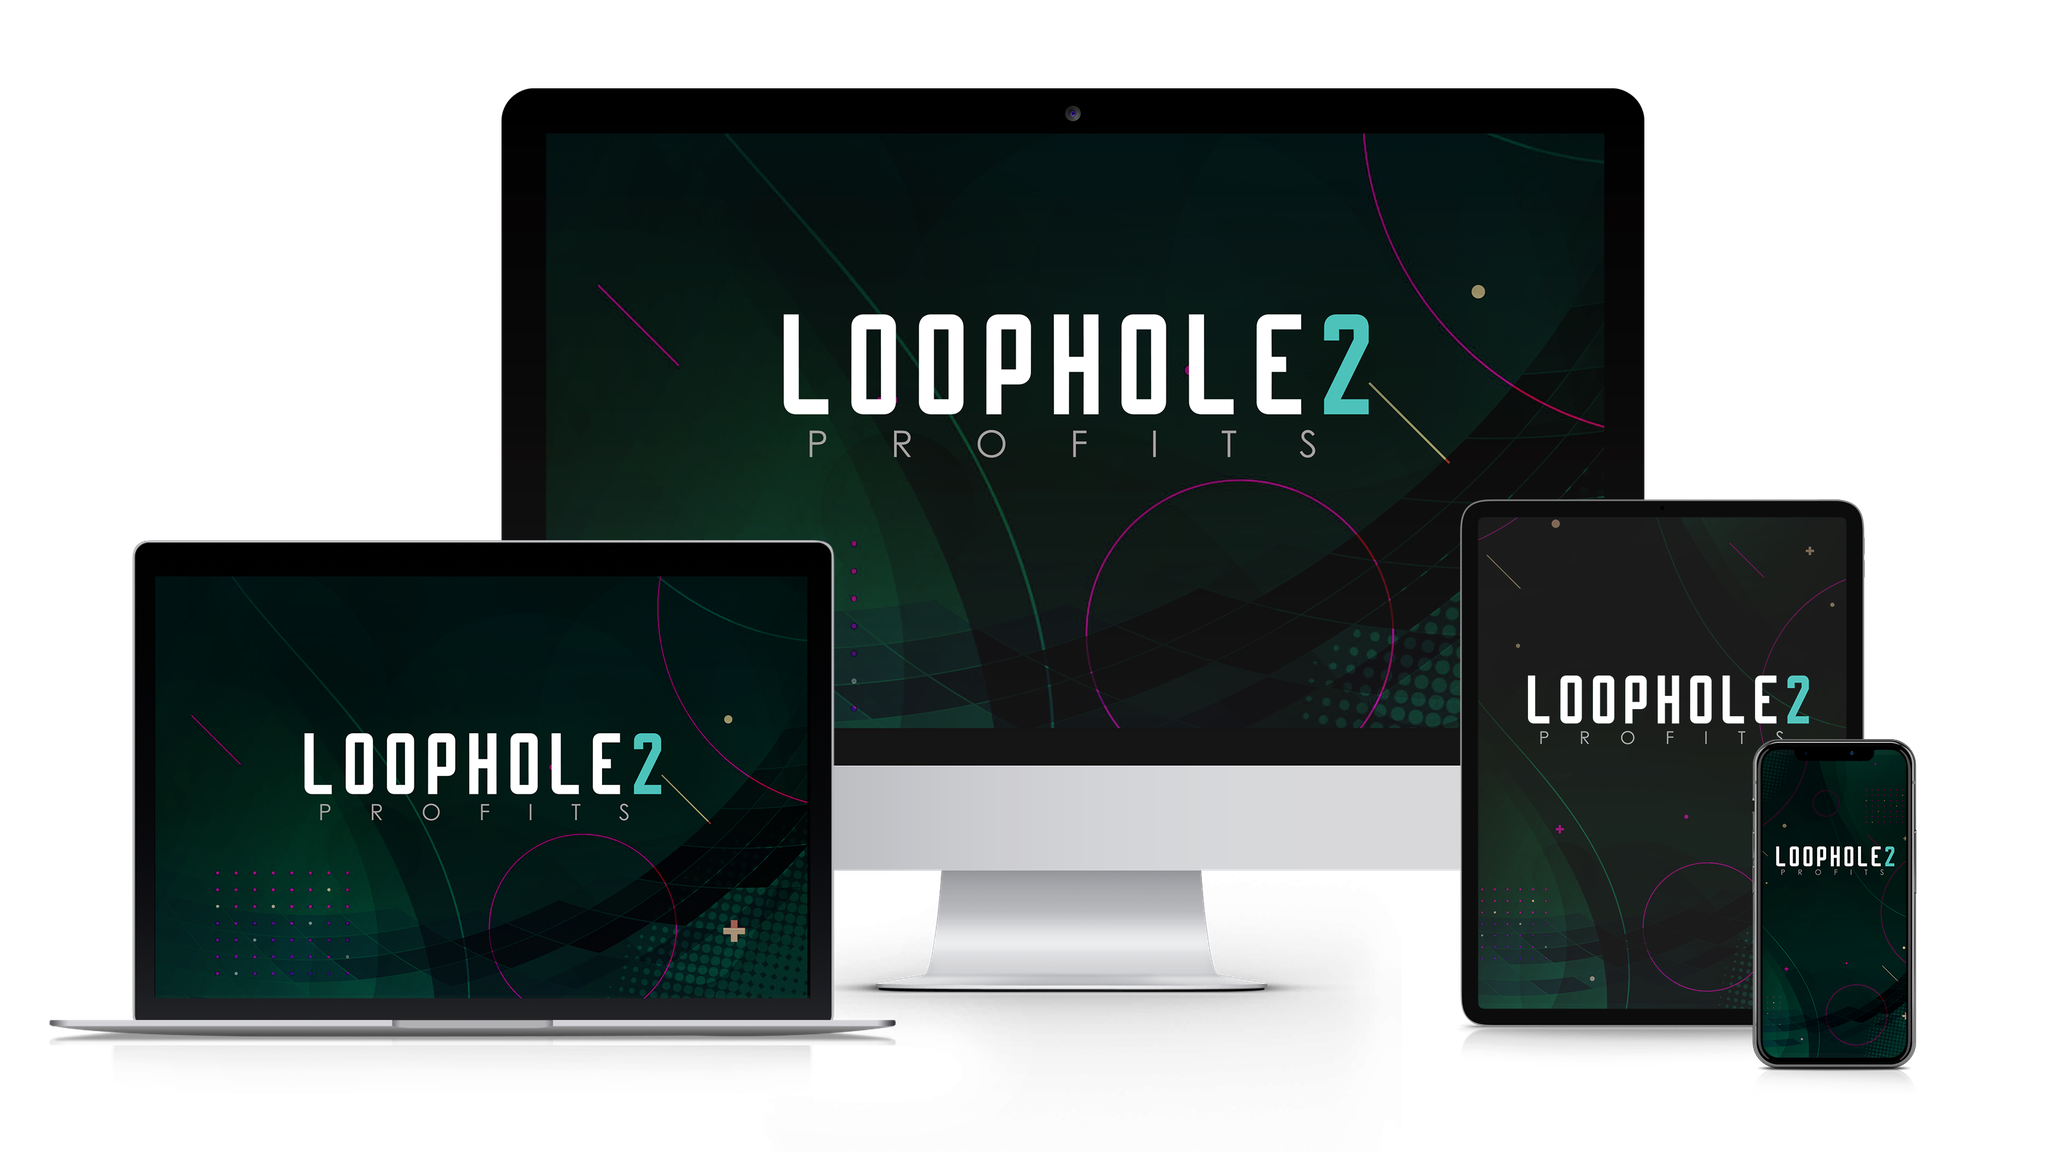 Loophole 2 Profits Review-imreviewpal